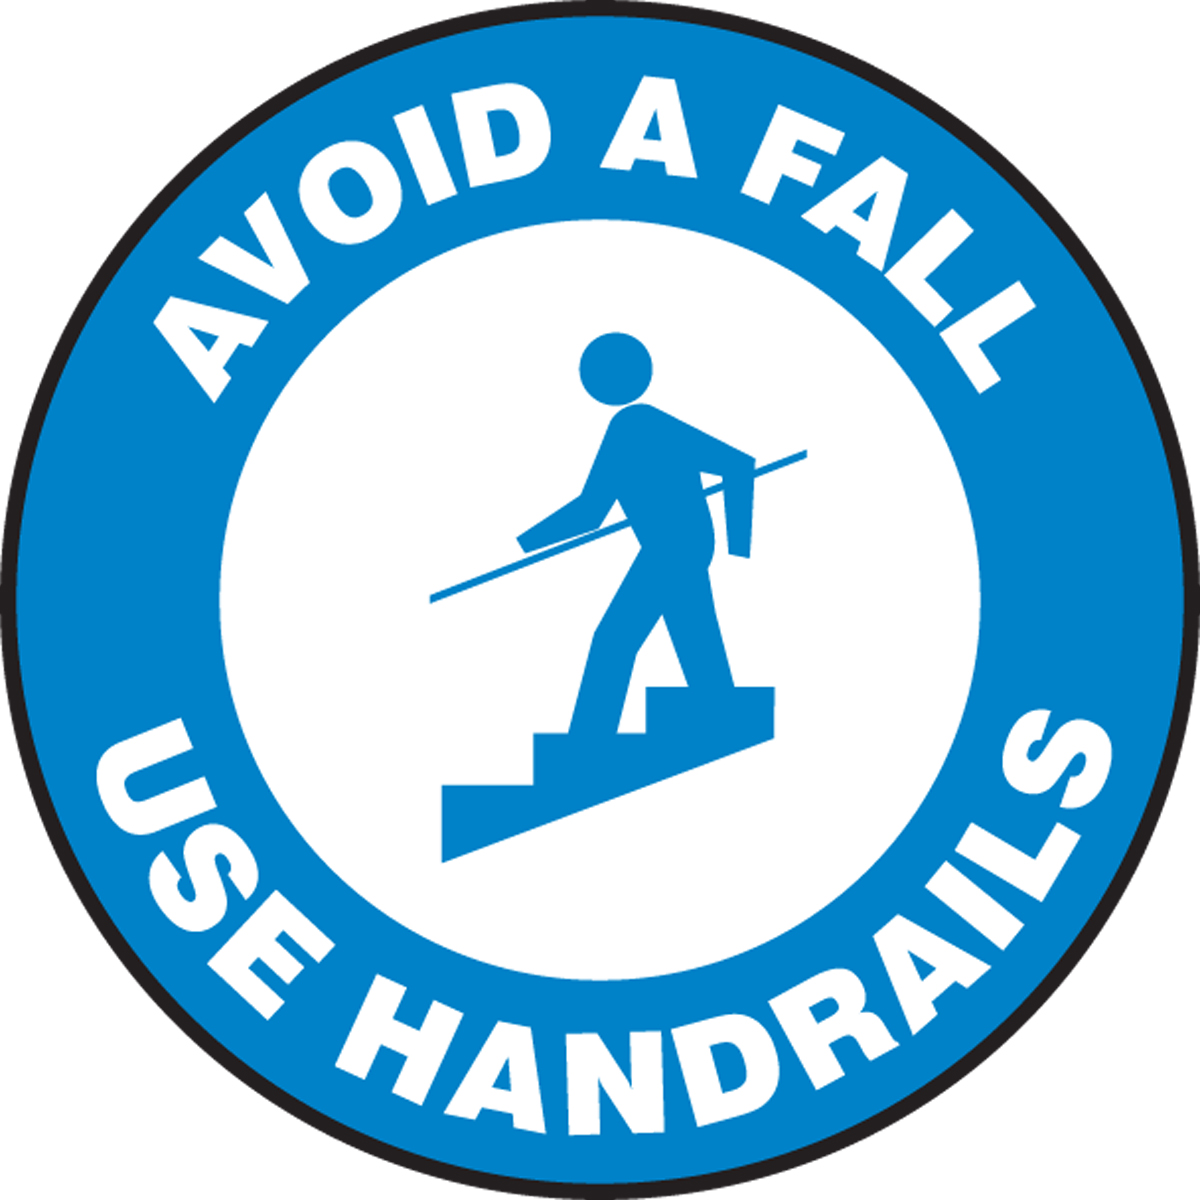 AVOID A FALL USE HANDRAILS W/GRAPHIC